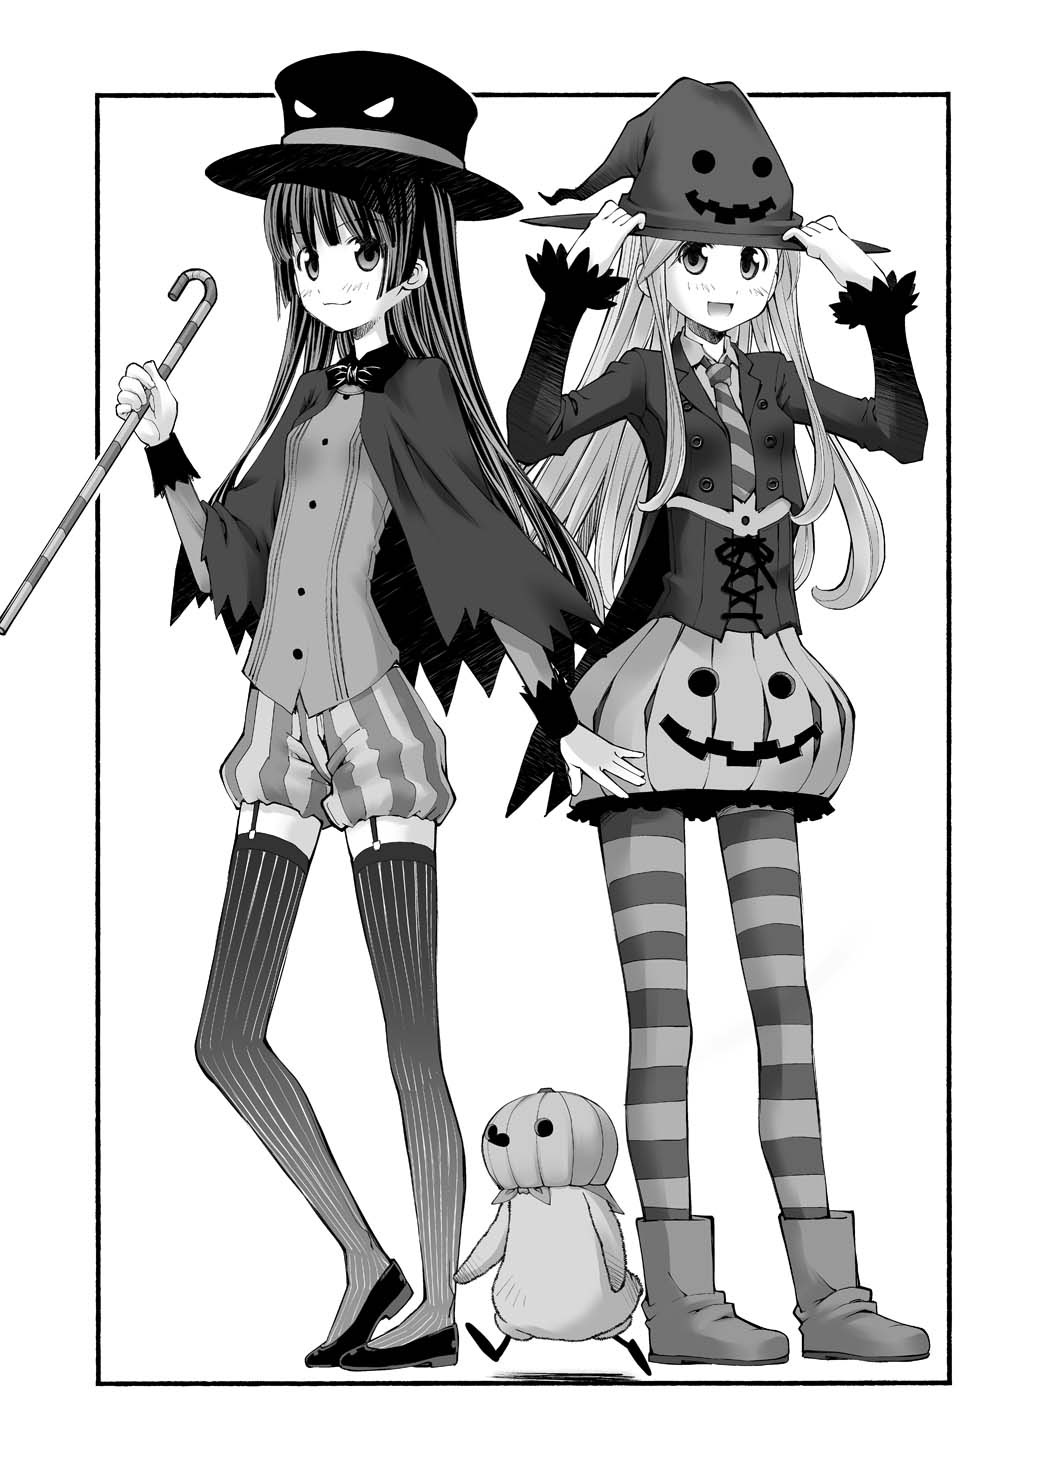 2girls adjusting_clothes adjusting_headwear bangs bird blouse boater_hat boots candy candy_cane capelet closed_mouth coattails commentary_request eyebrows_visible_through_hair flats food garter_straps greyscale halloween halloween_costume hat heel_up highres holding holding_candy holding_food jacket junketsu_sensen kusano_kouichi long_hair long_sleeves looking_at_viewer monochrome multiple_girls open_mouth outside_border pantyhose penguin pumpkin_pants pumpkin_skirt side-by-side smile standing striped striped_legwear thigh-highs vertical-striped_legwear vertical_stripes witch_hat